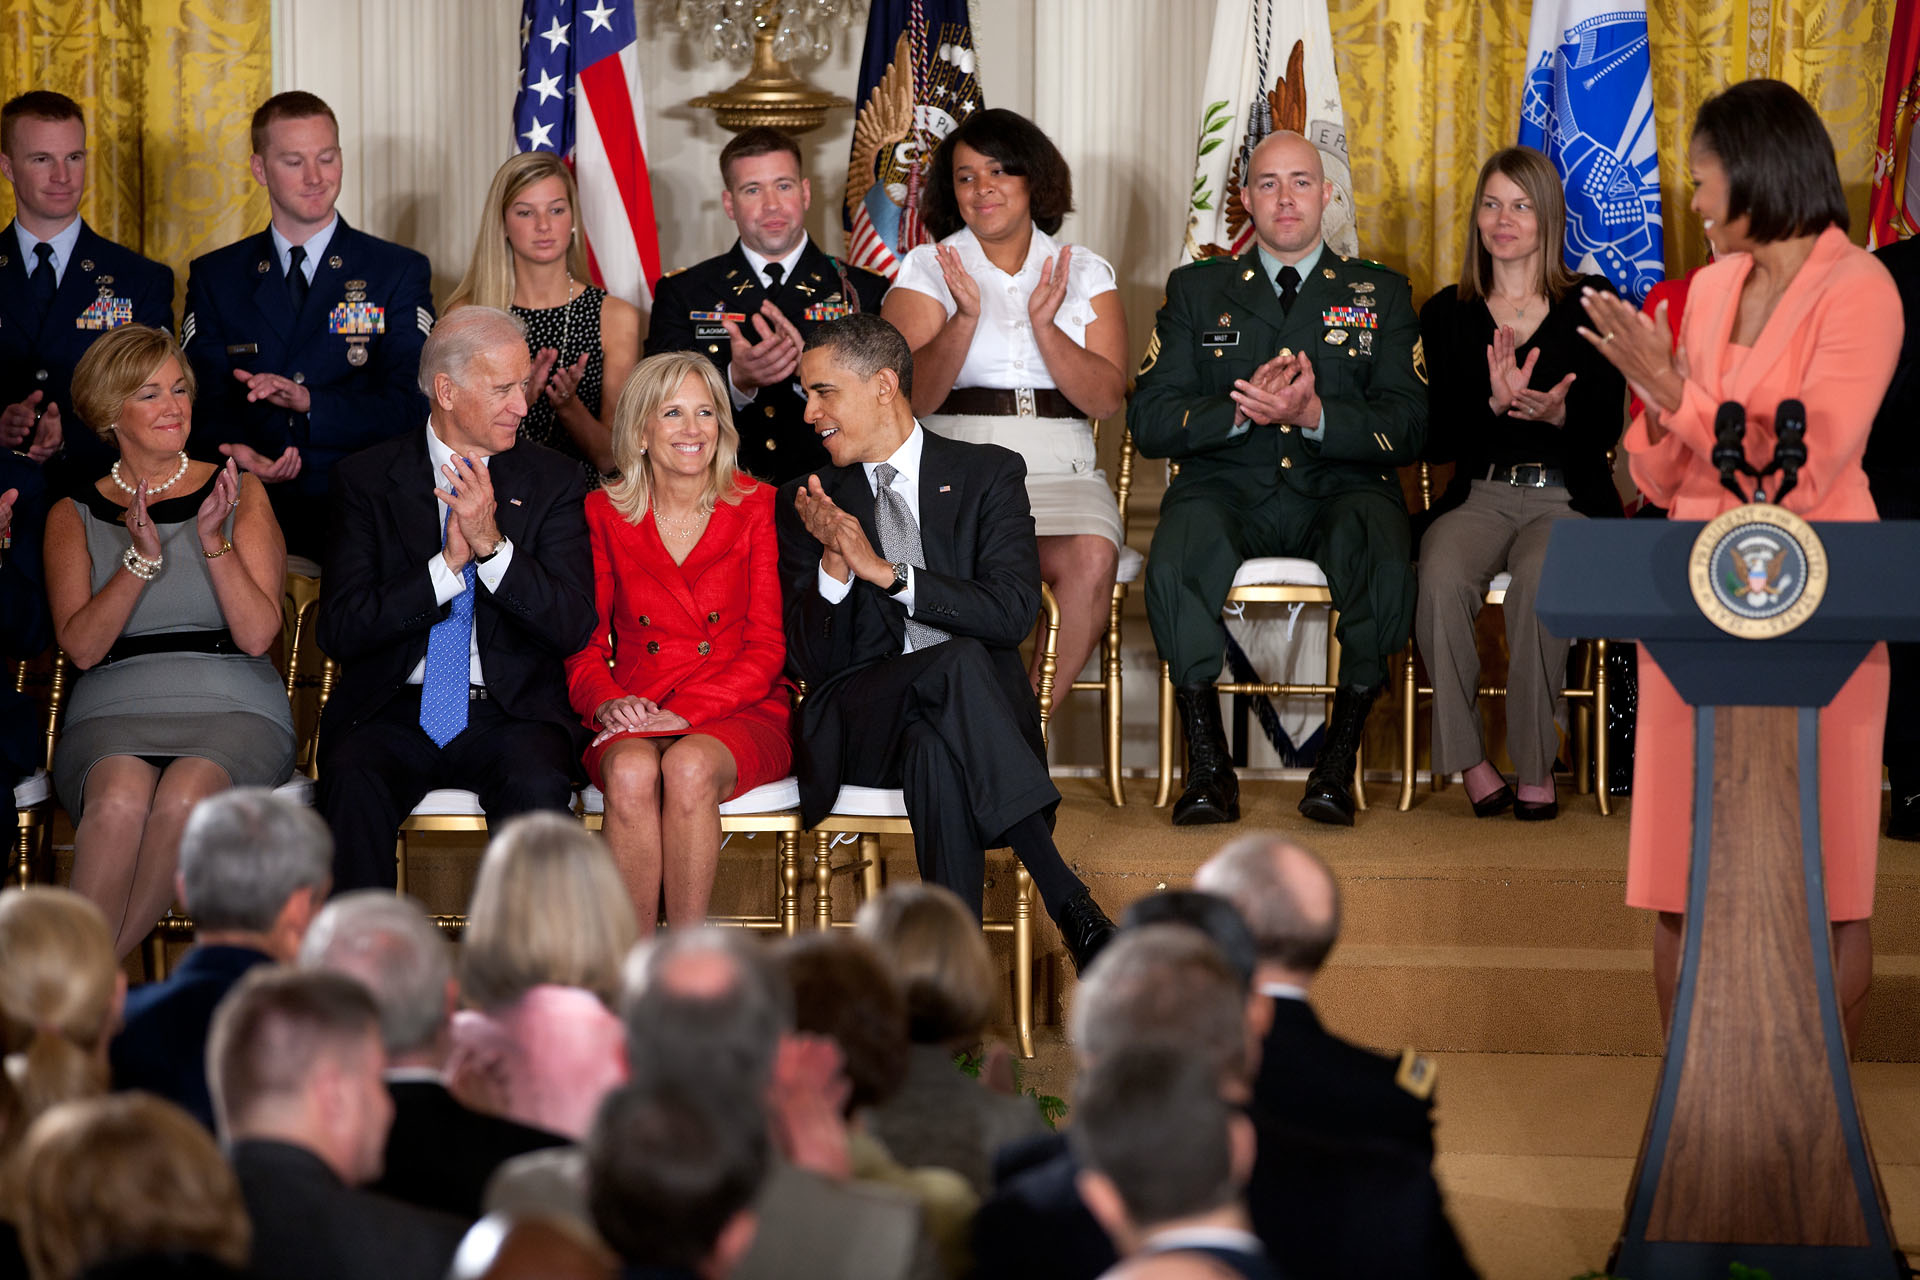 President Barack Obama, First Lady Michelle Obama, and Vice President Joe Biden acknowledge Dr. Jill Biden during the launch of the Joining Forces initiative to support and honor America’s service members and their families, in the East Room of the White House April 12, 2011. (Official White House Photo by Lawrence Jackson)